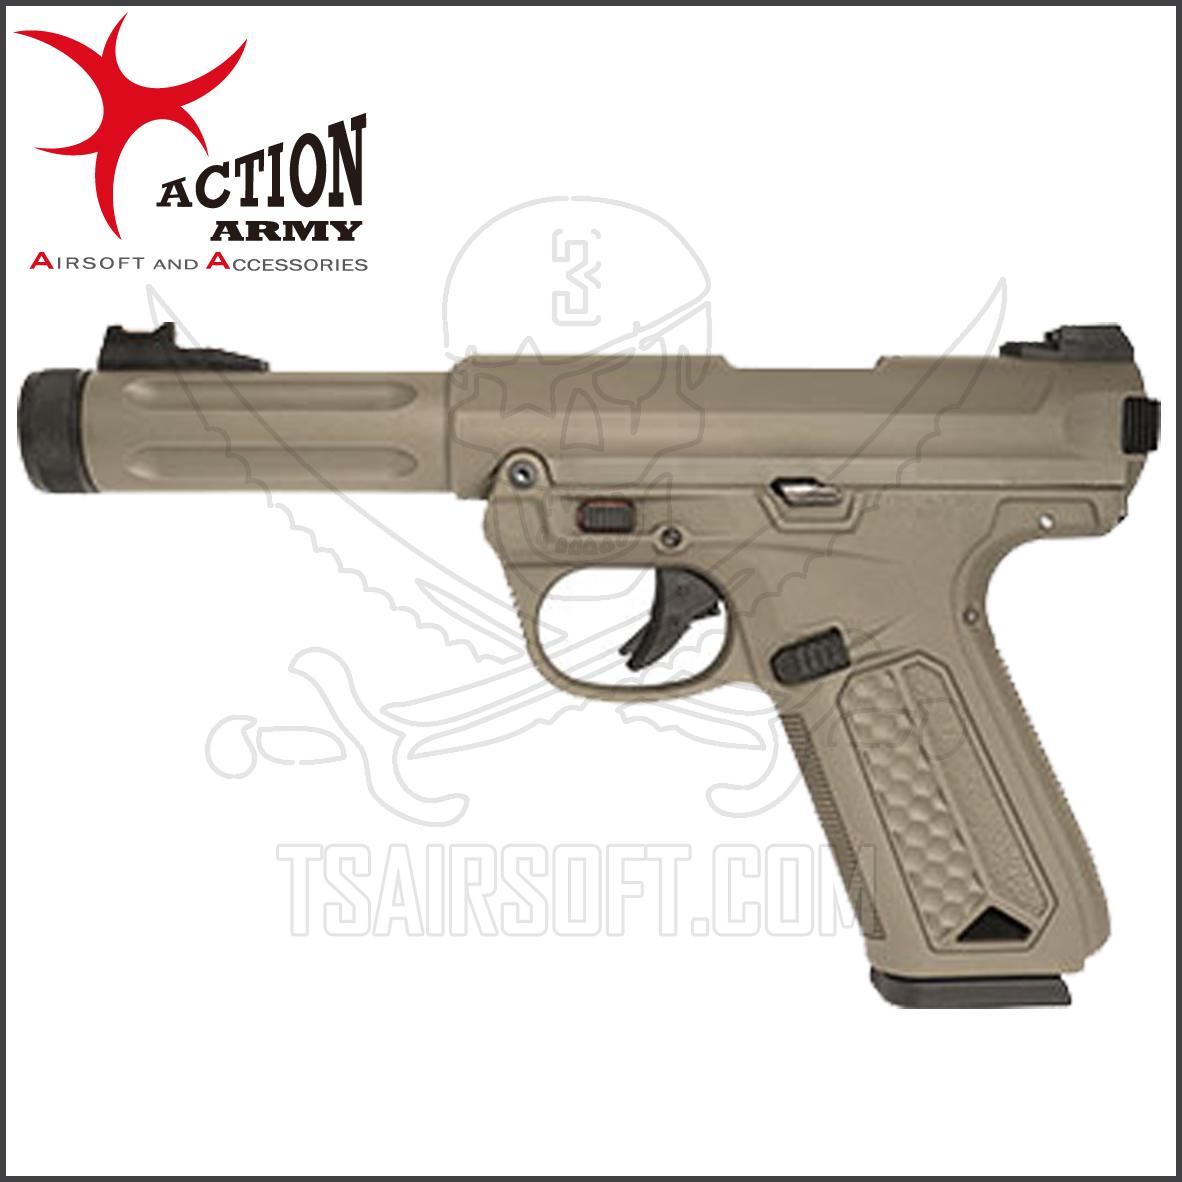 ACTION ARMY - AAP-01 ASSASSIN - FDE